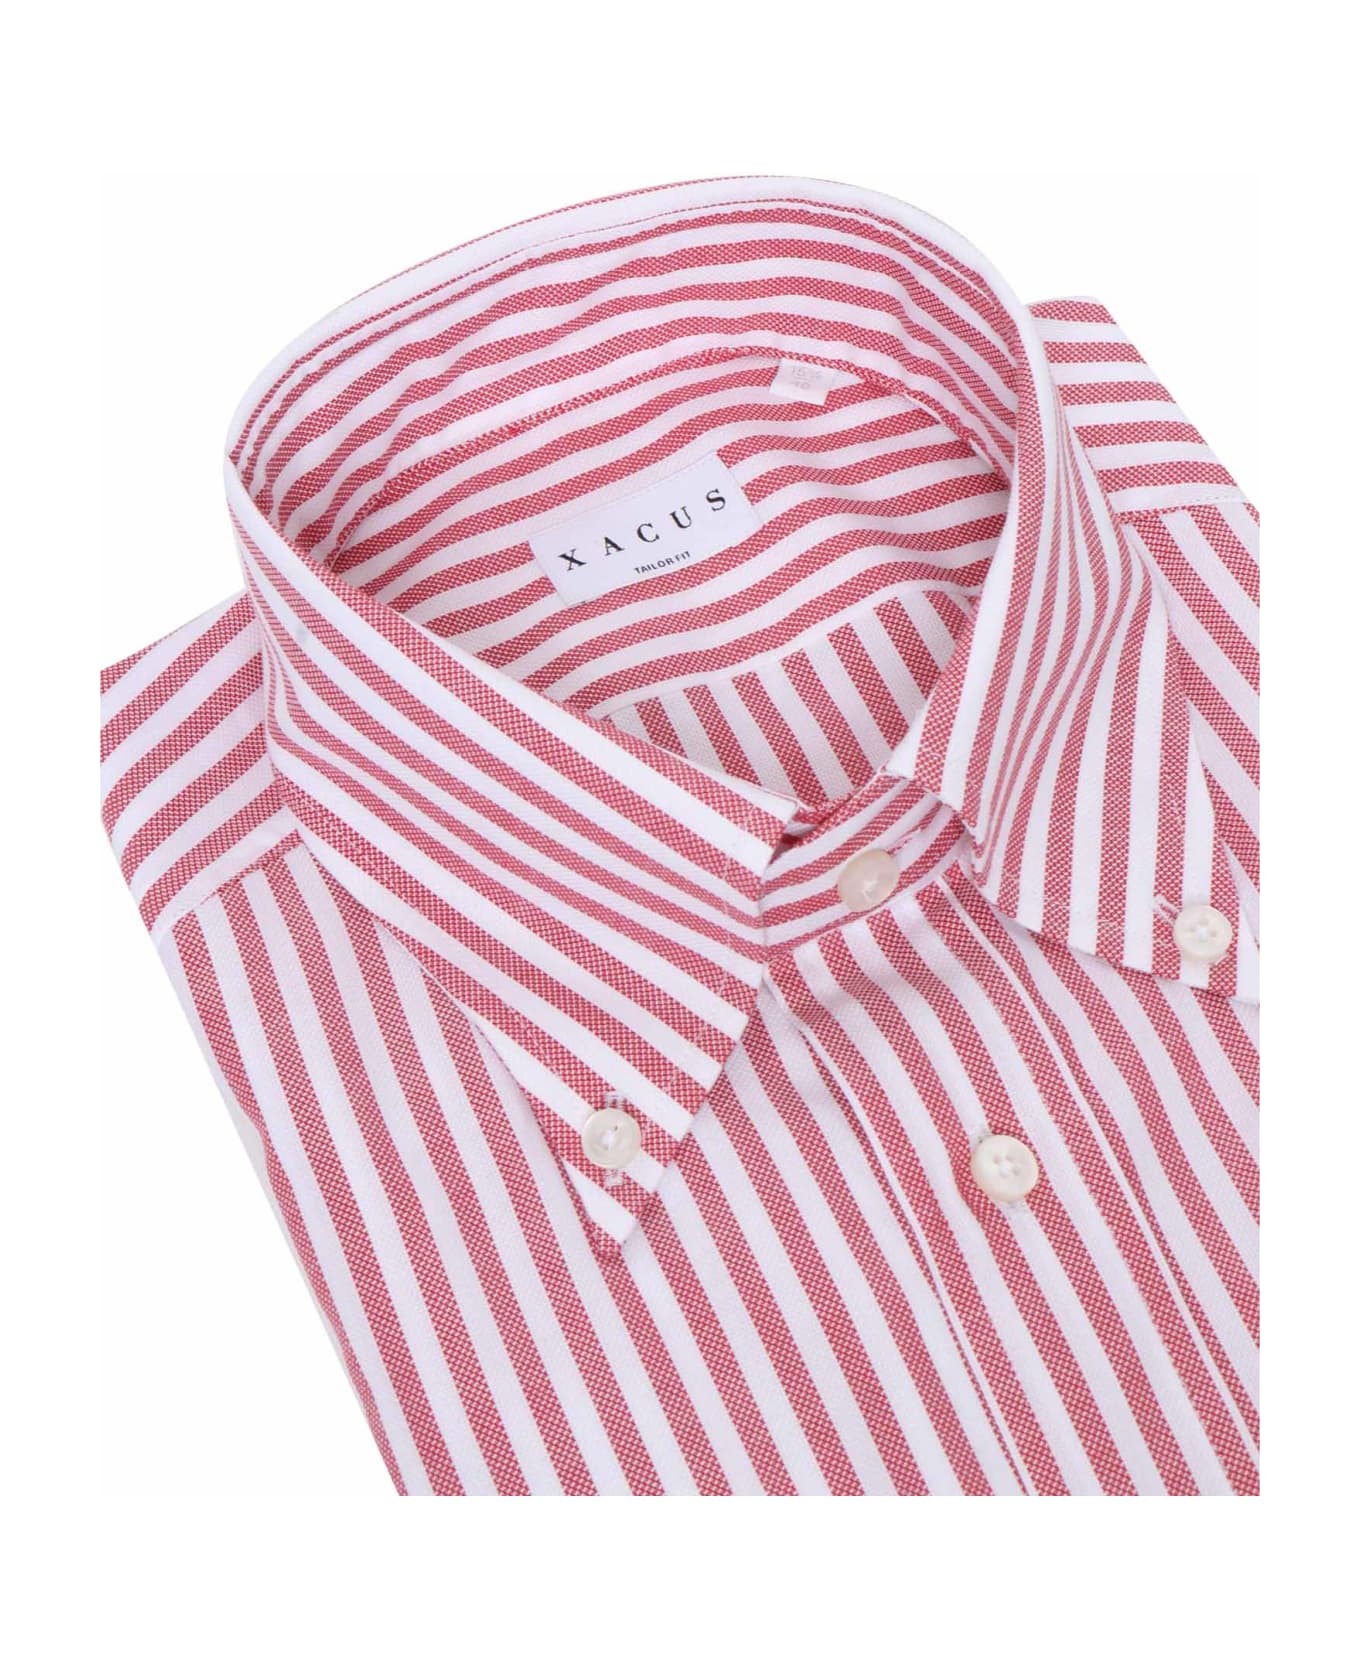 Xacus Red Striped Shirt - MULTICOLOR